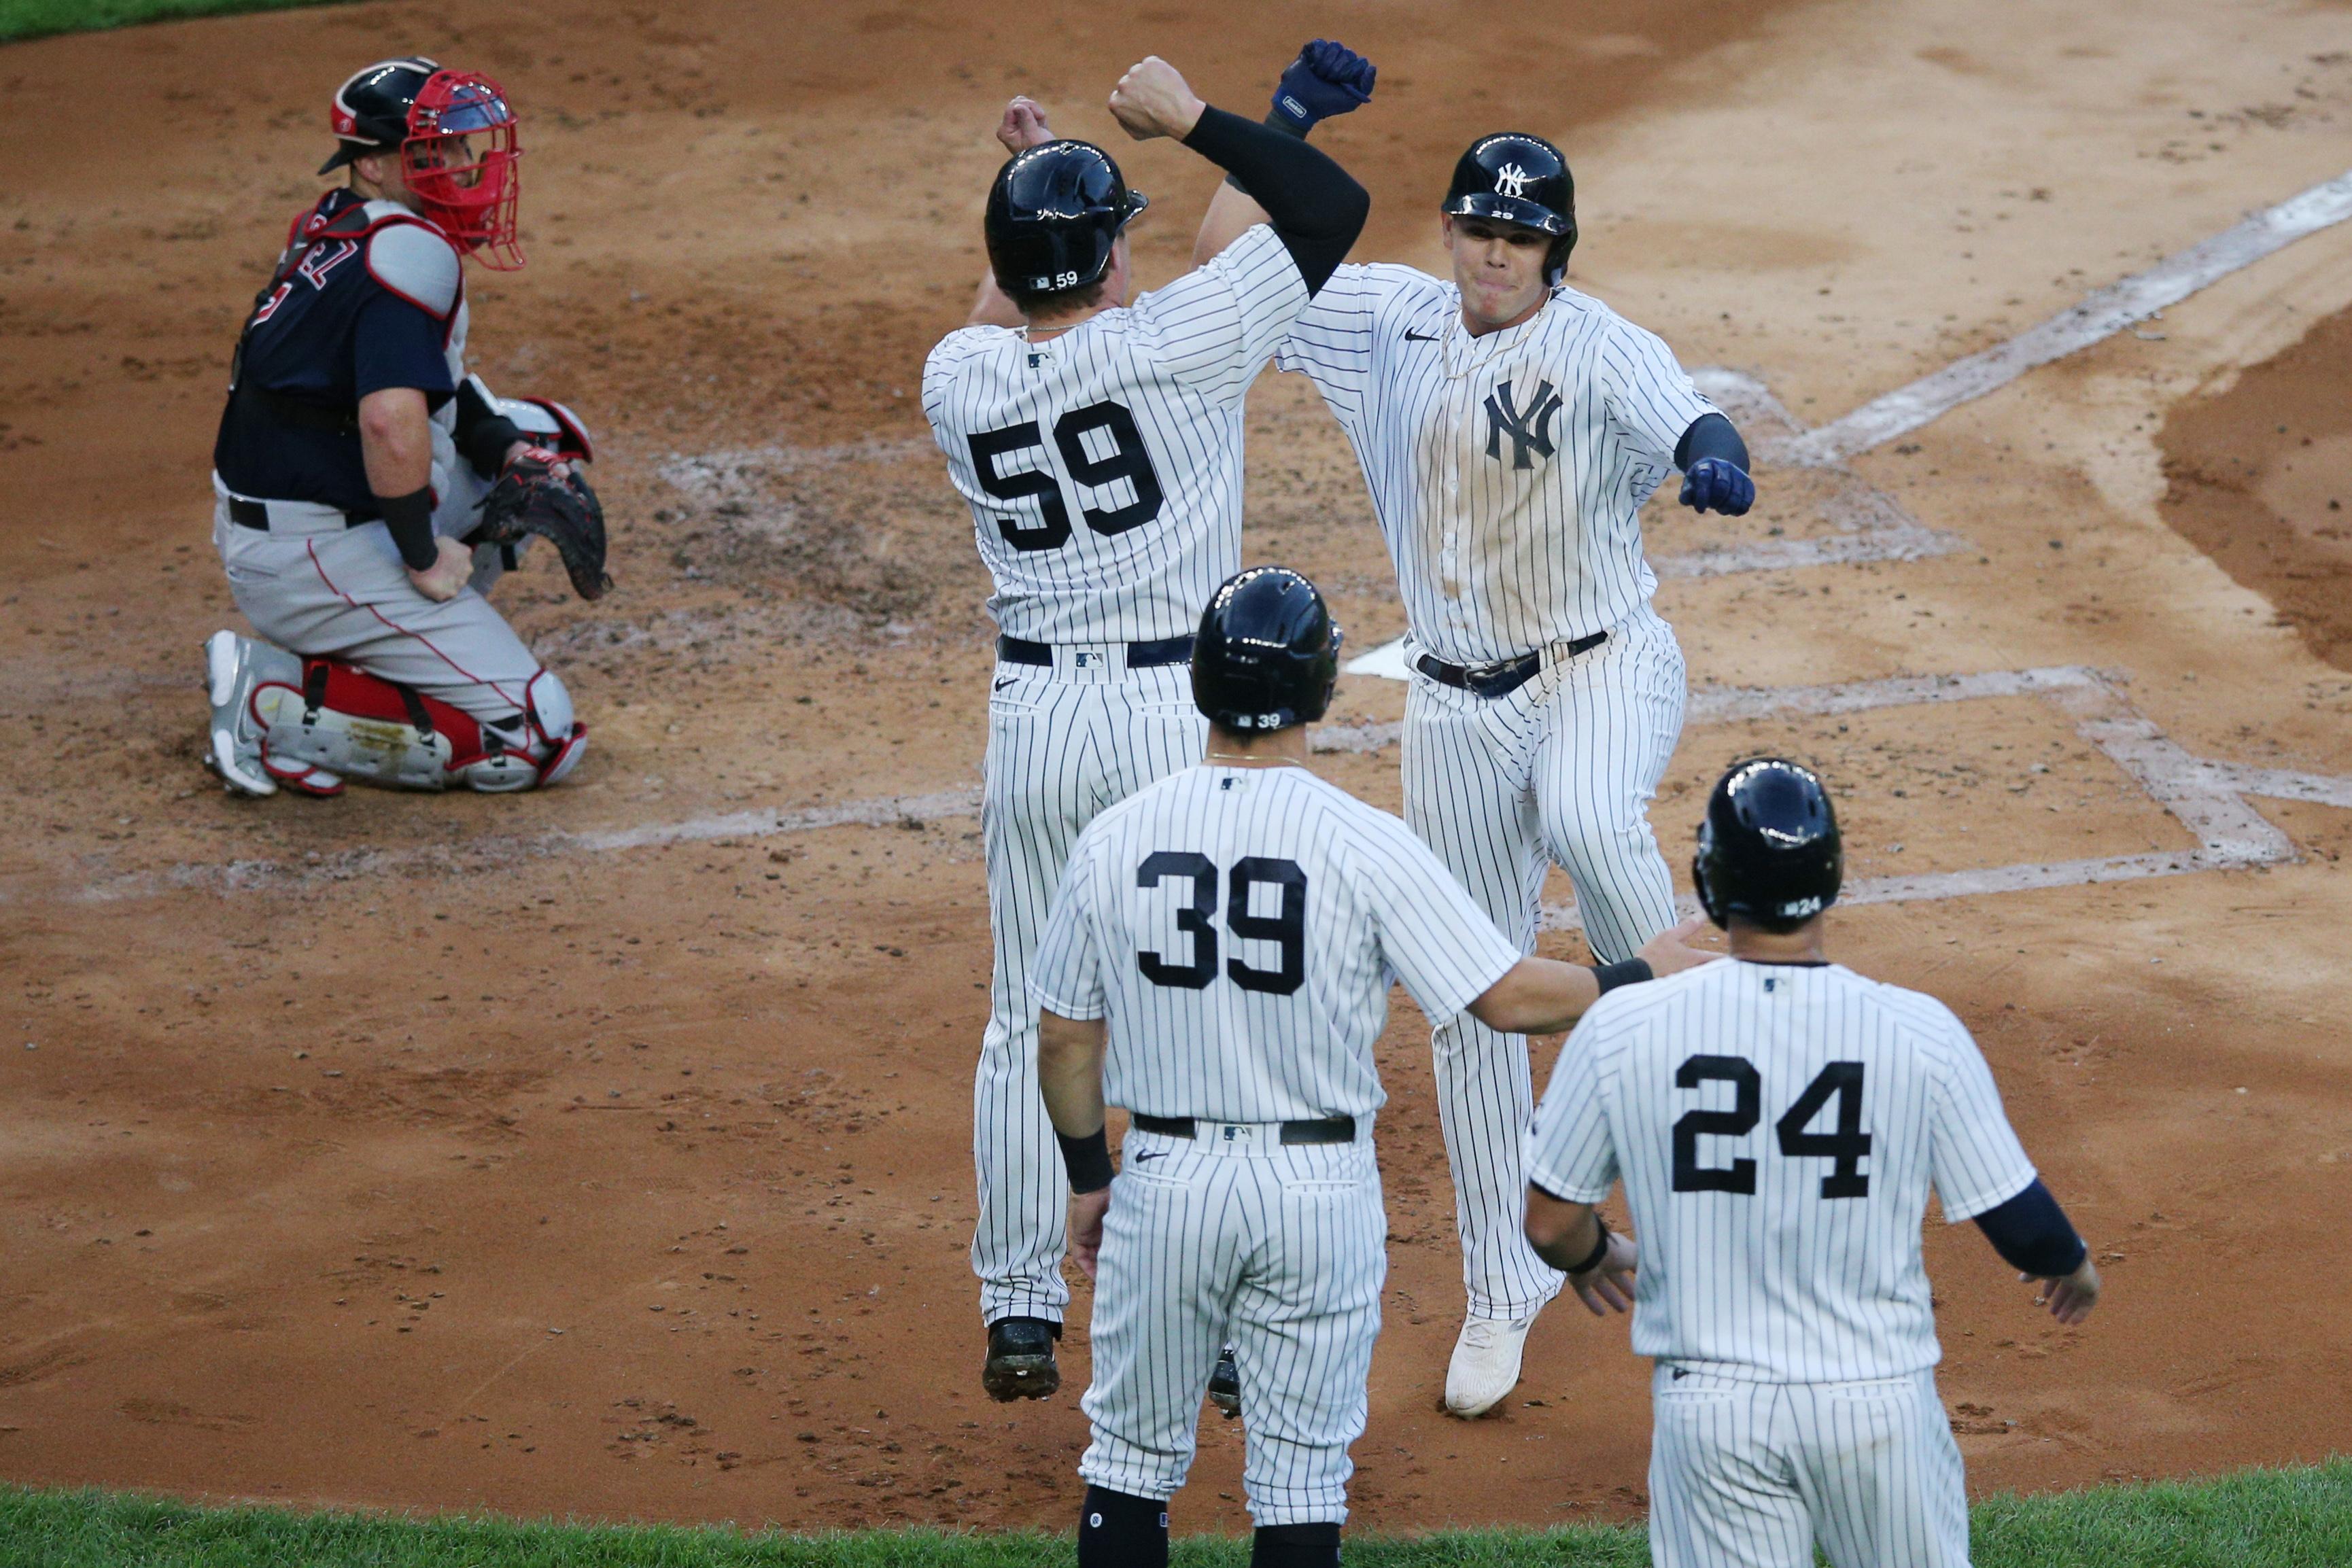 Aug 1, 2020; Bronx, New York, USA; New York Yankees third baseman Gio Urshela (29) celebrates his grand slam against the Boston Red Sox with first baseman Luke Voit (59) and left fielder Mike Tauchman (39) and catcher Gary Sanchez (24) during the second inning at Yankee Stadium. Mandatory Credit: Brad Penner-USA TODAY Sports / Brad Penner-USA TODAY Sports